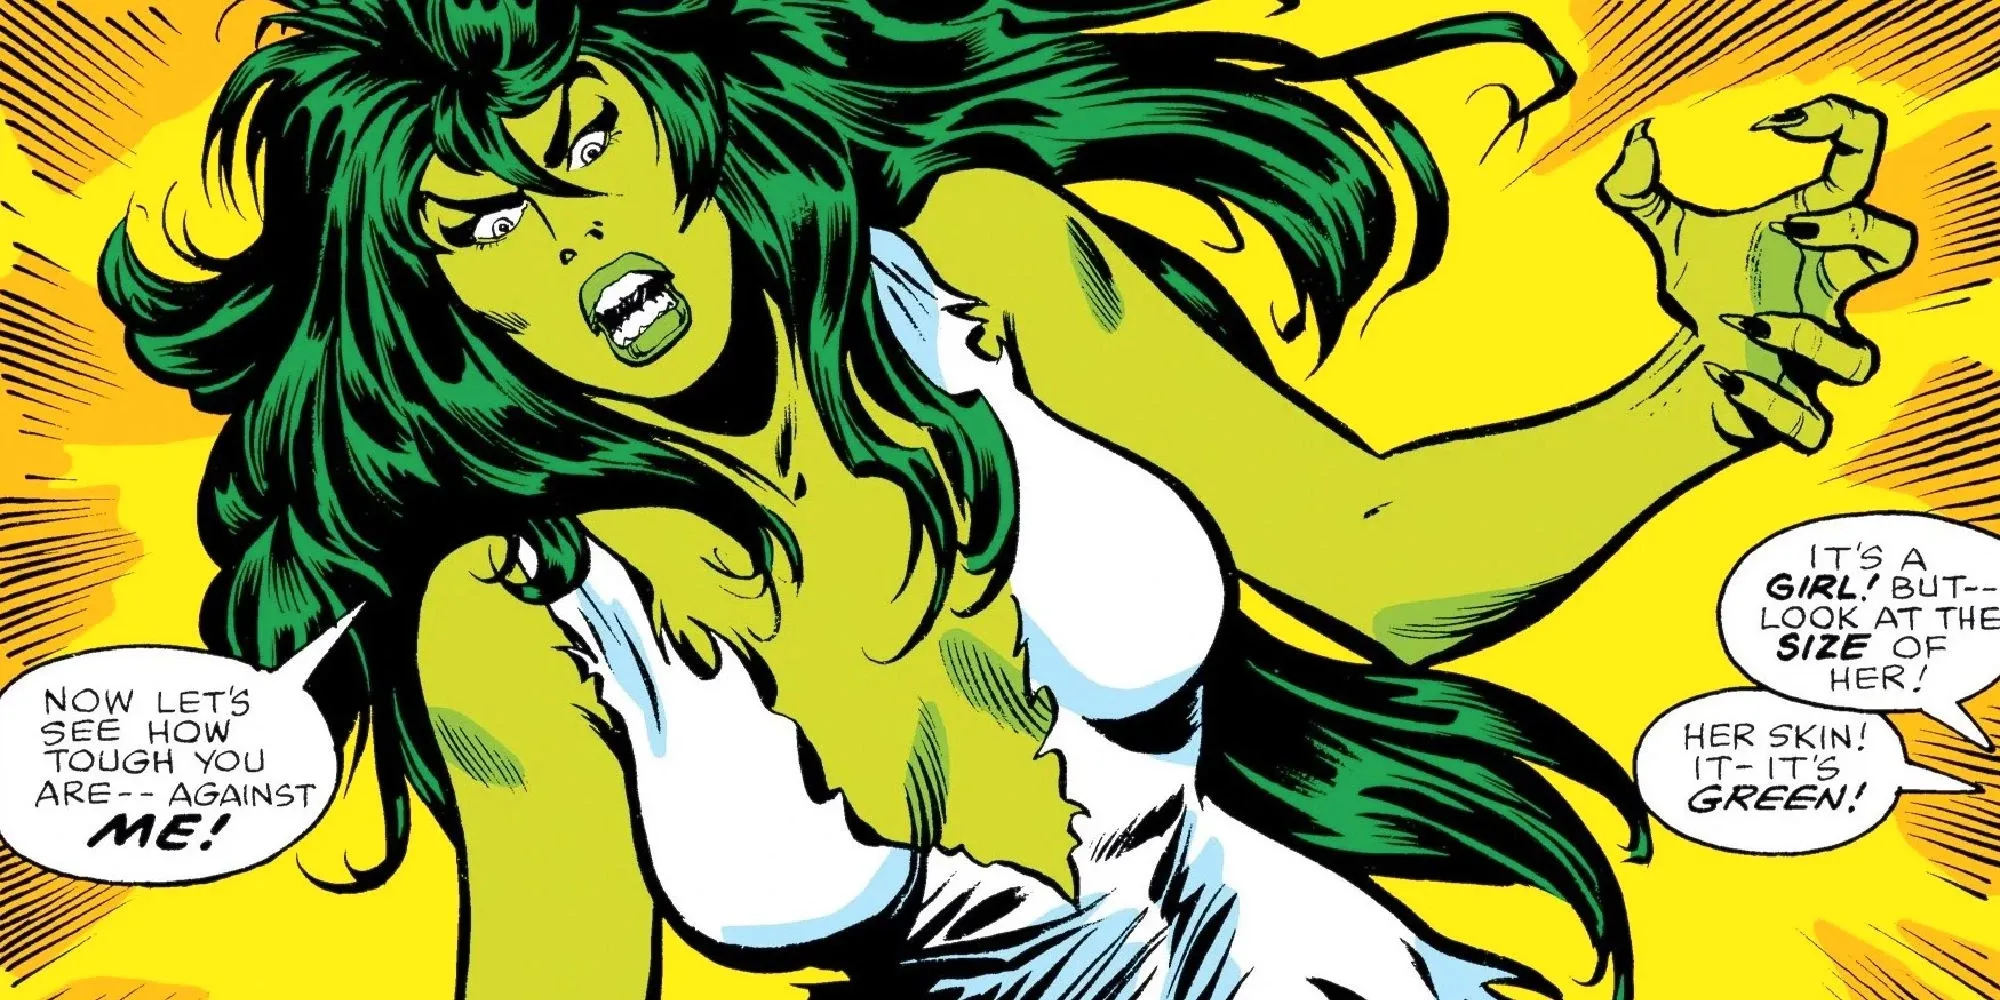 she-hulk in her first appearance